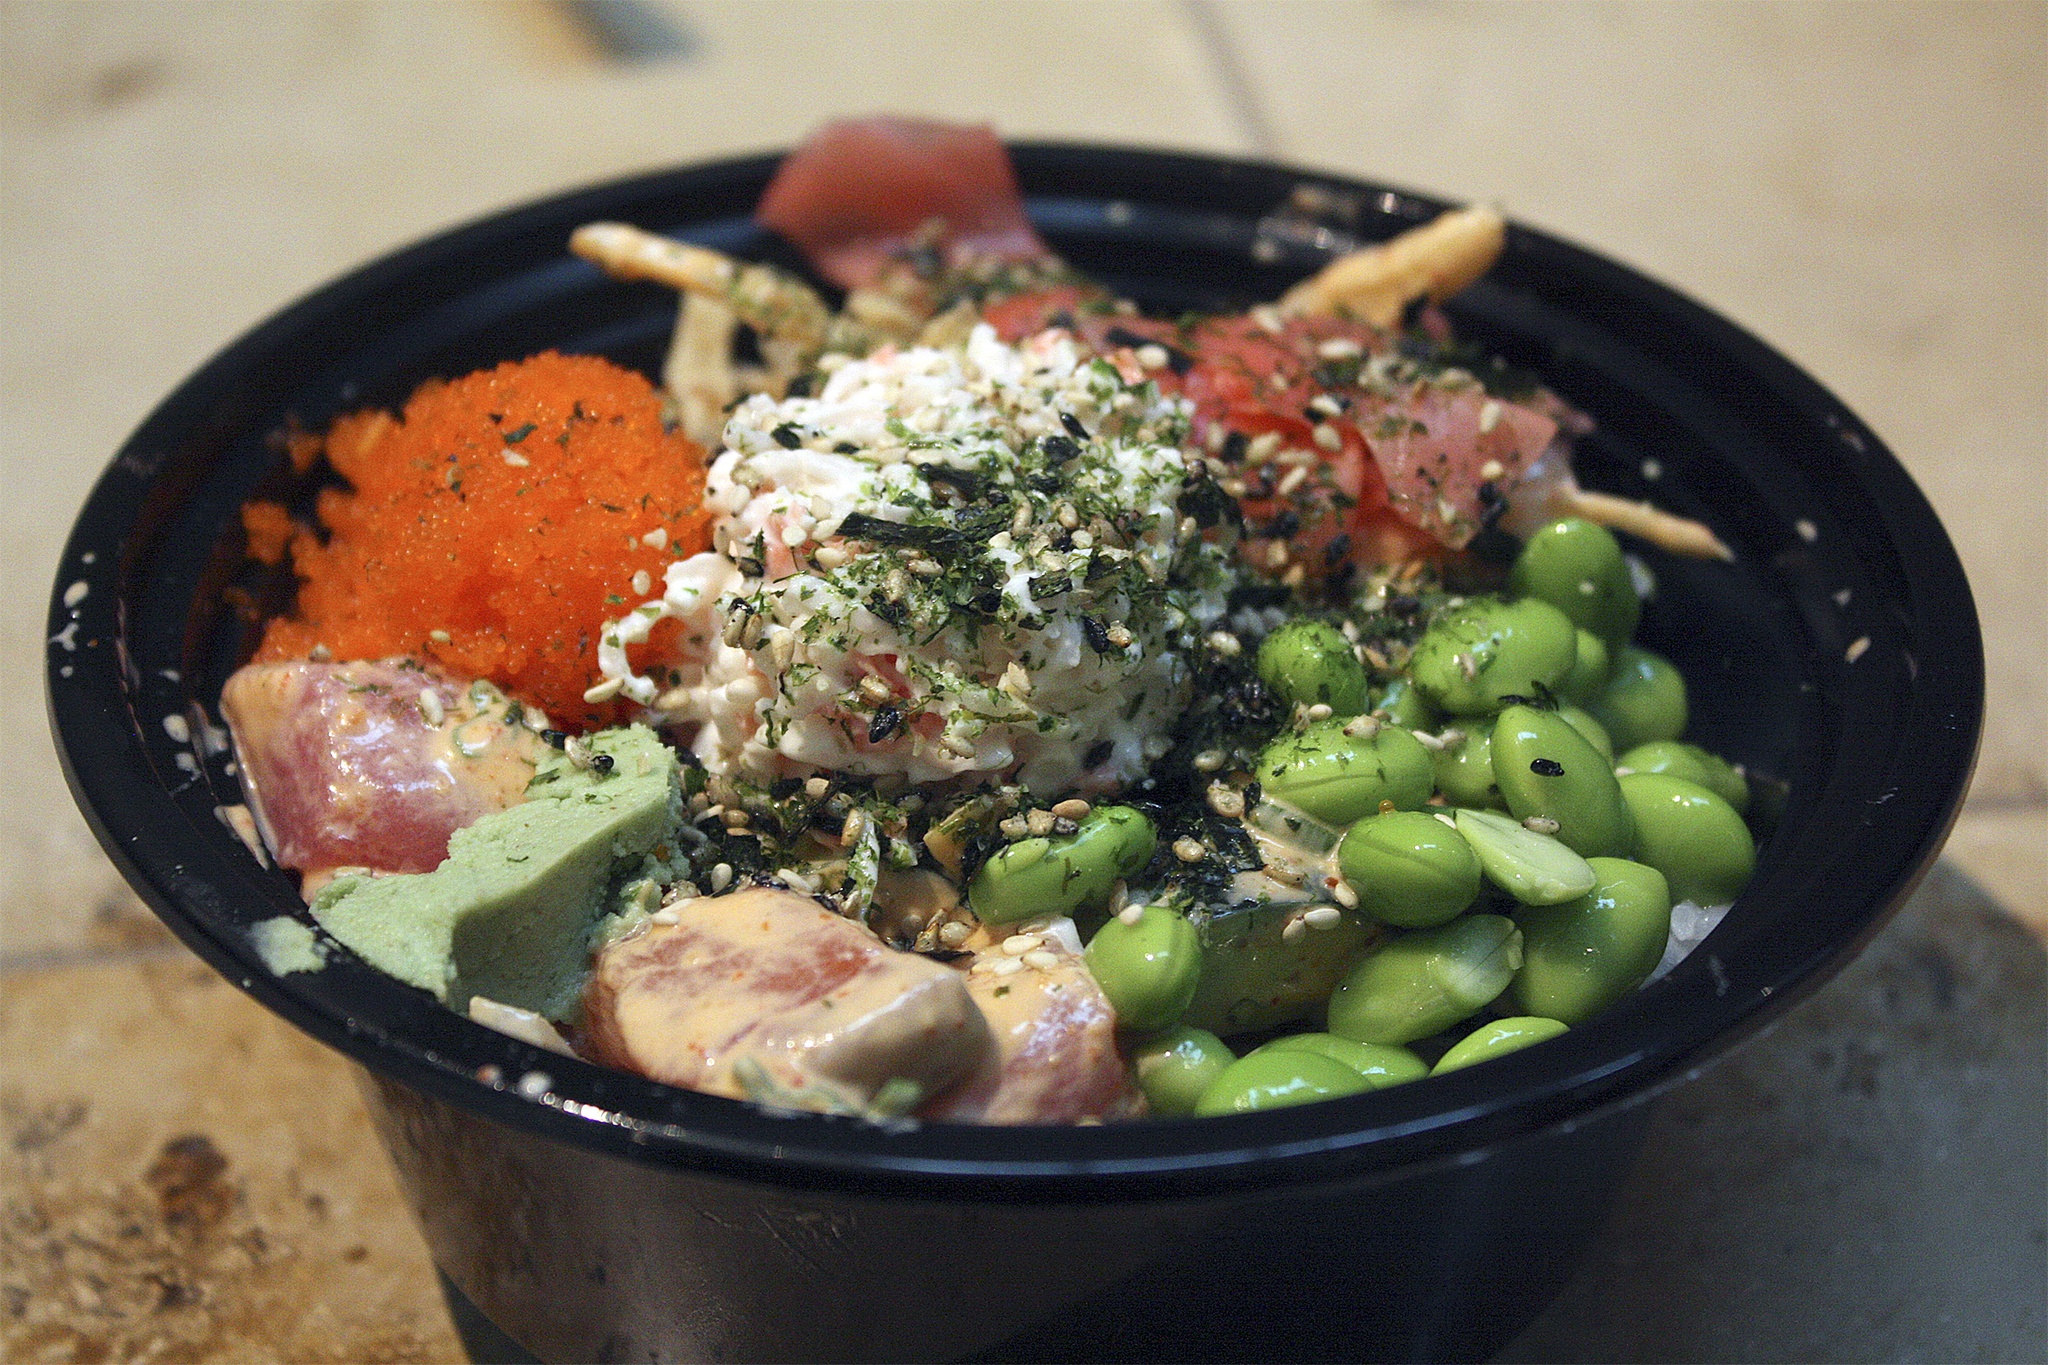 This salmon and tuna poke bowl with spicy miso sauce is standard fare at Bellevue's Poke MIX